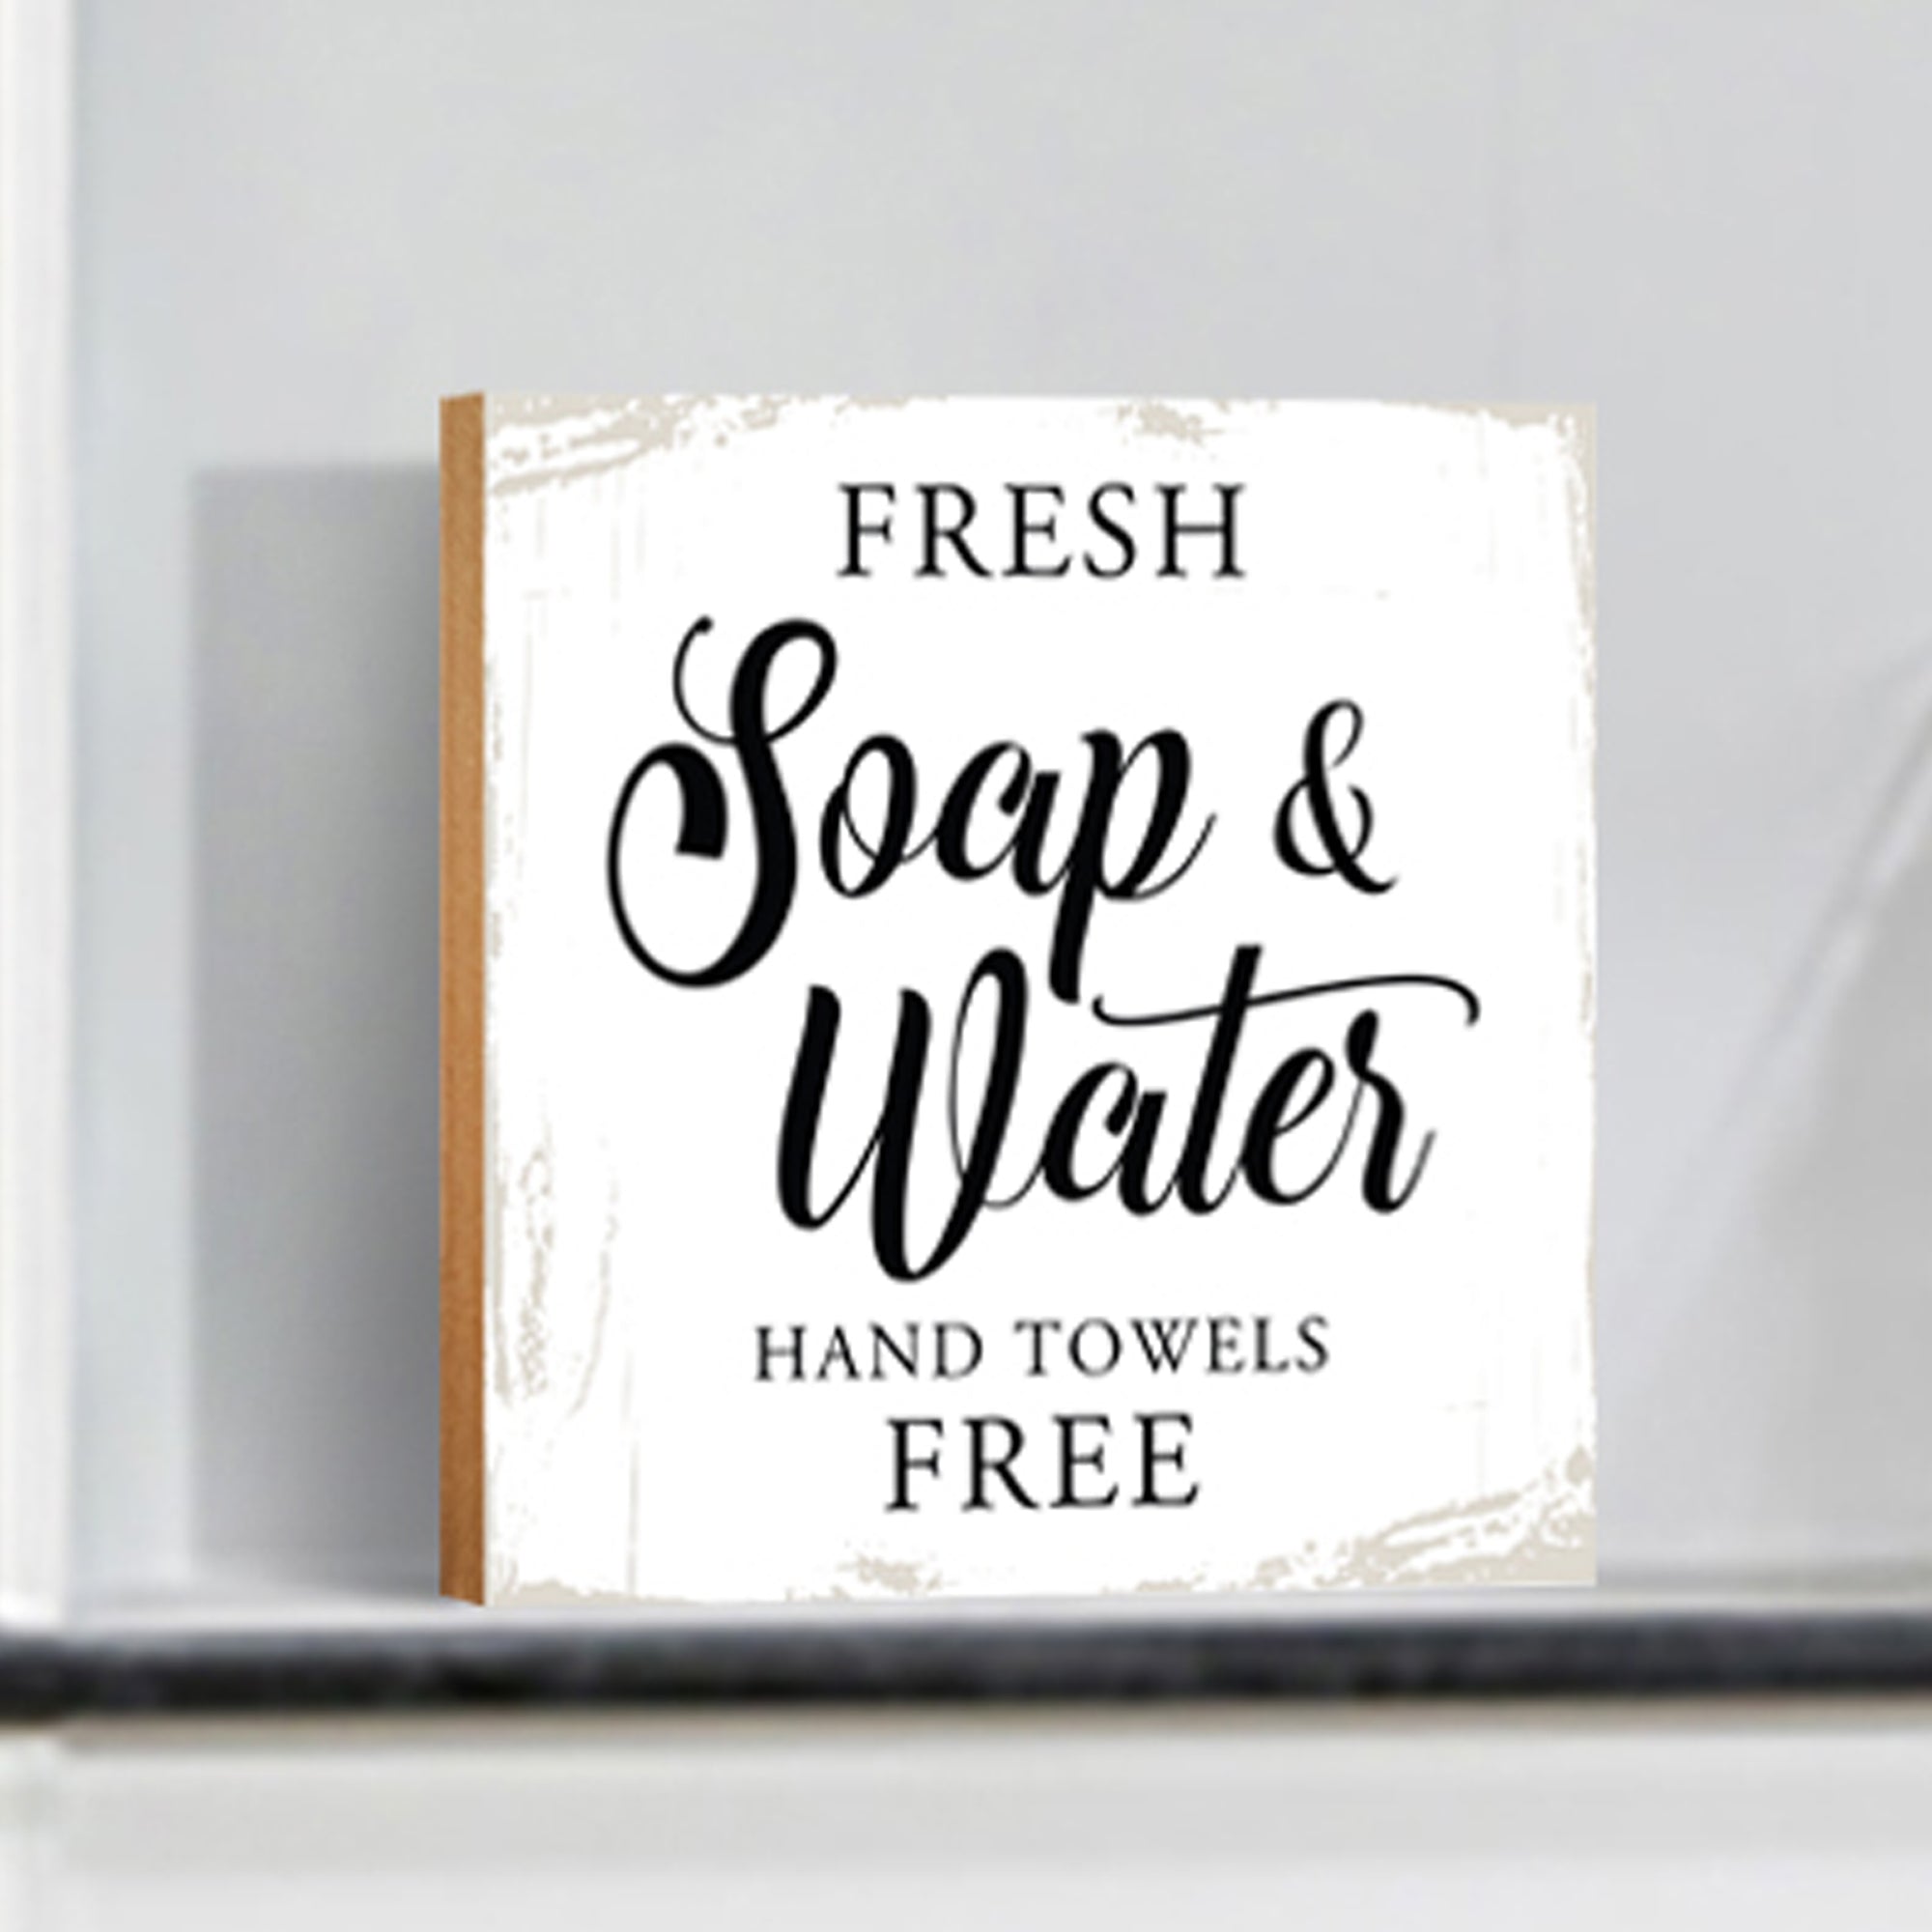 Wooden BATHROOM 6x6 Block shelf decor (Fresh Soap & Water) Inspirational Plaque Tabletop and Family Home Decoration